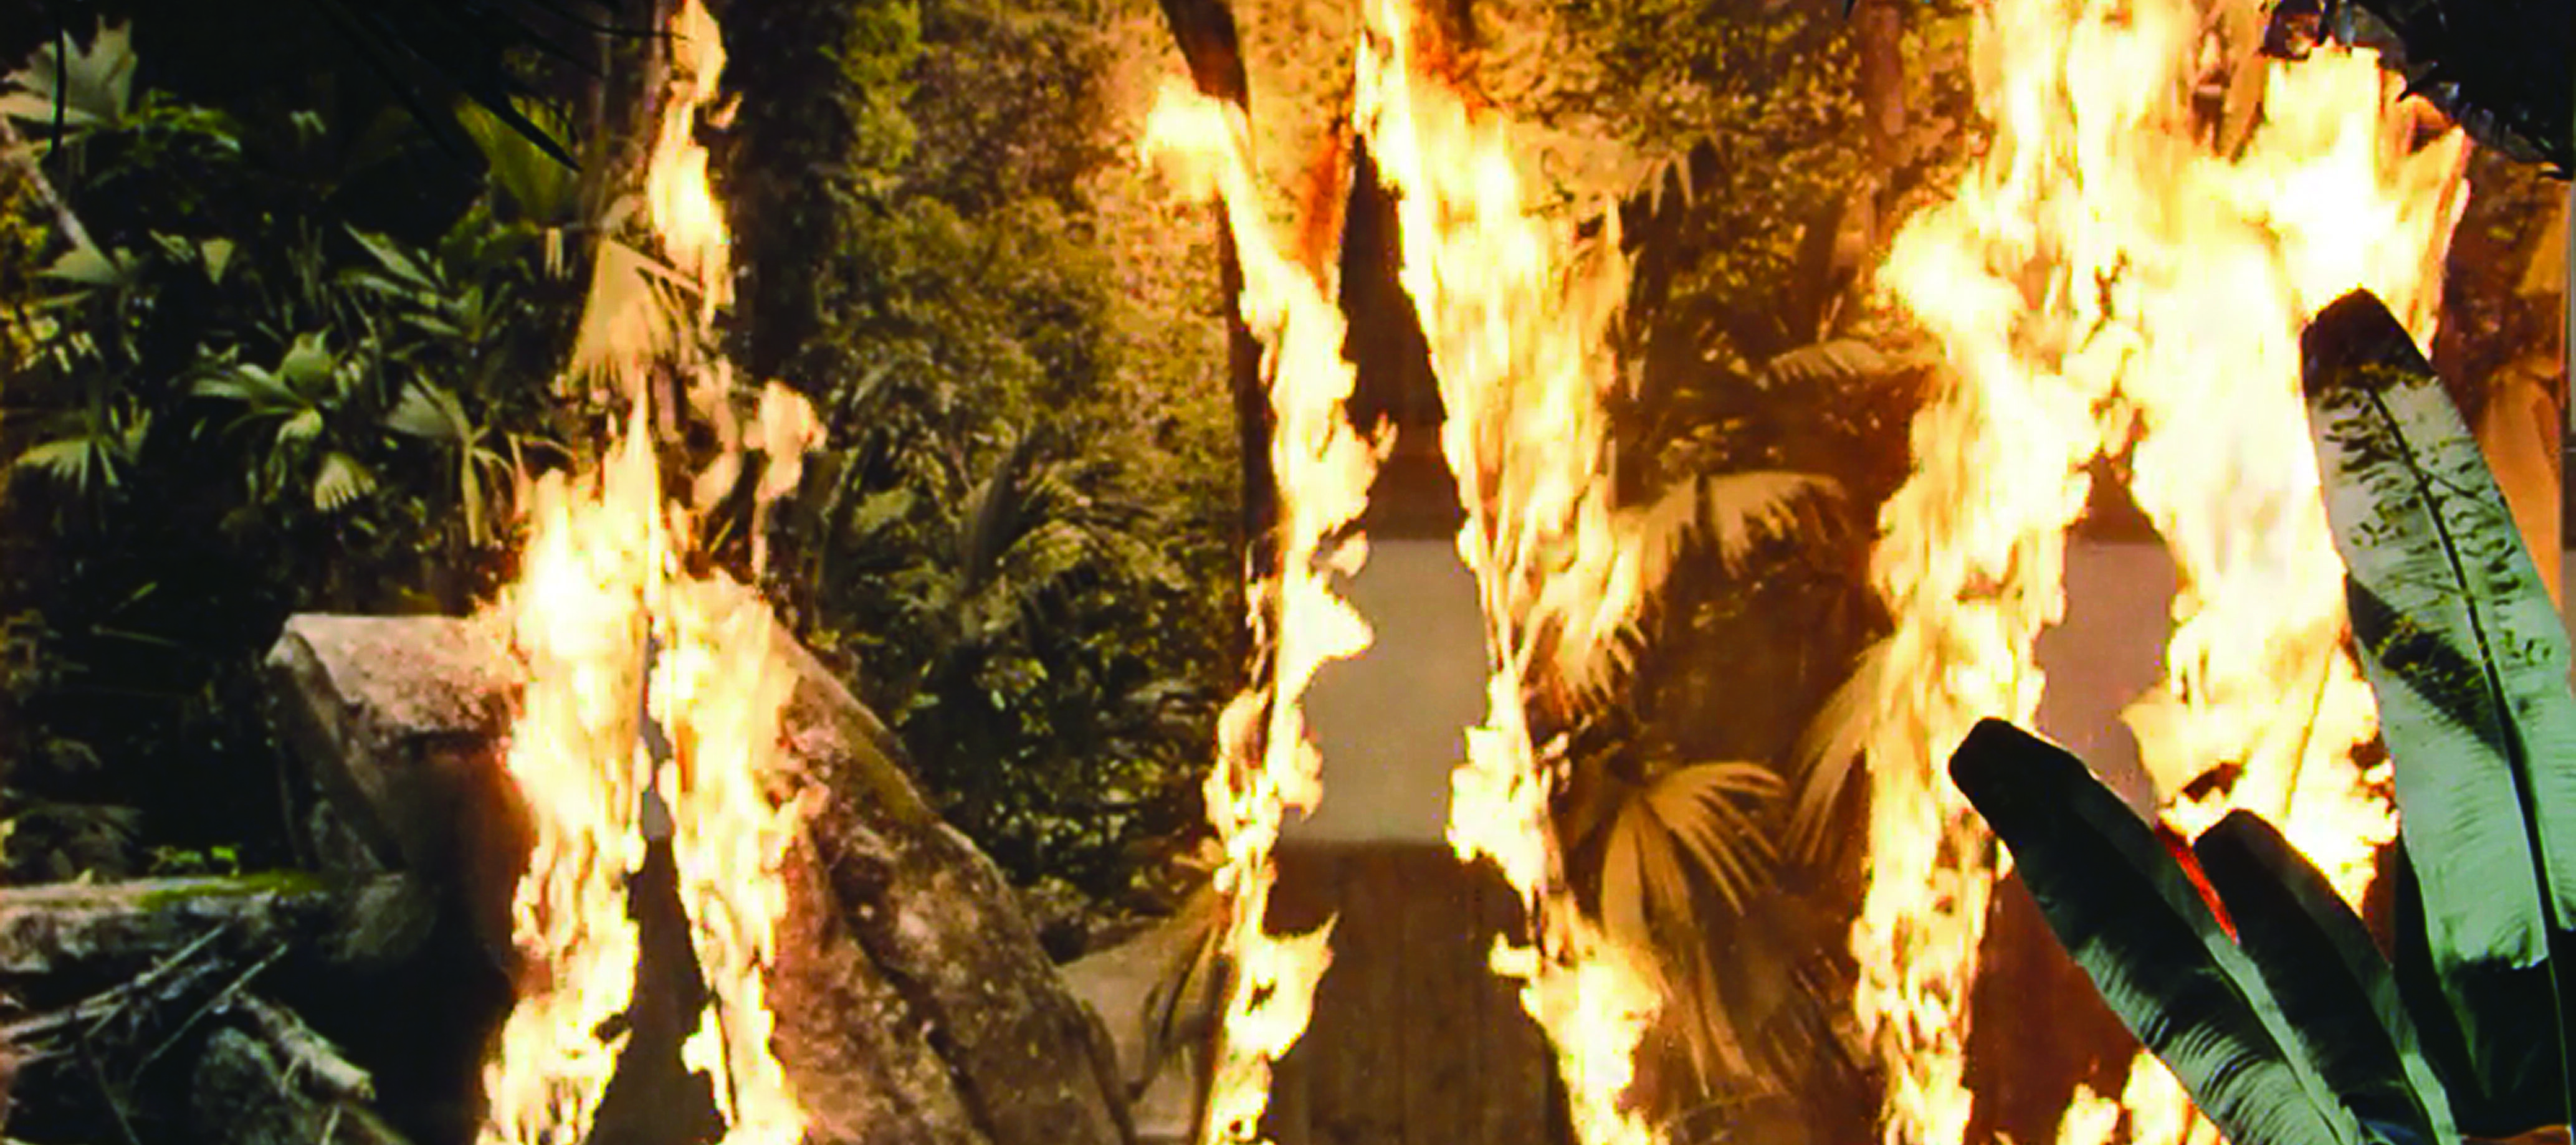 A still image from a short film showing what looks like a beach jungle on fire in three places. In reality, the image is a hanging, large-scale photograph of a beach jungle engulfed with flames. Sand and plants can be seen in front of the photograph, further adding to the illusion.